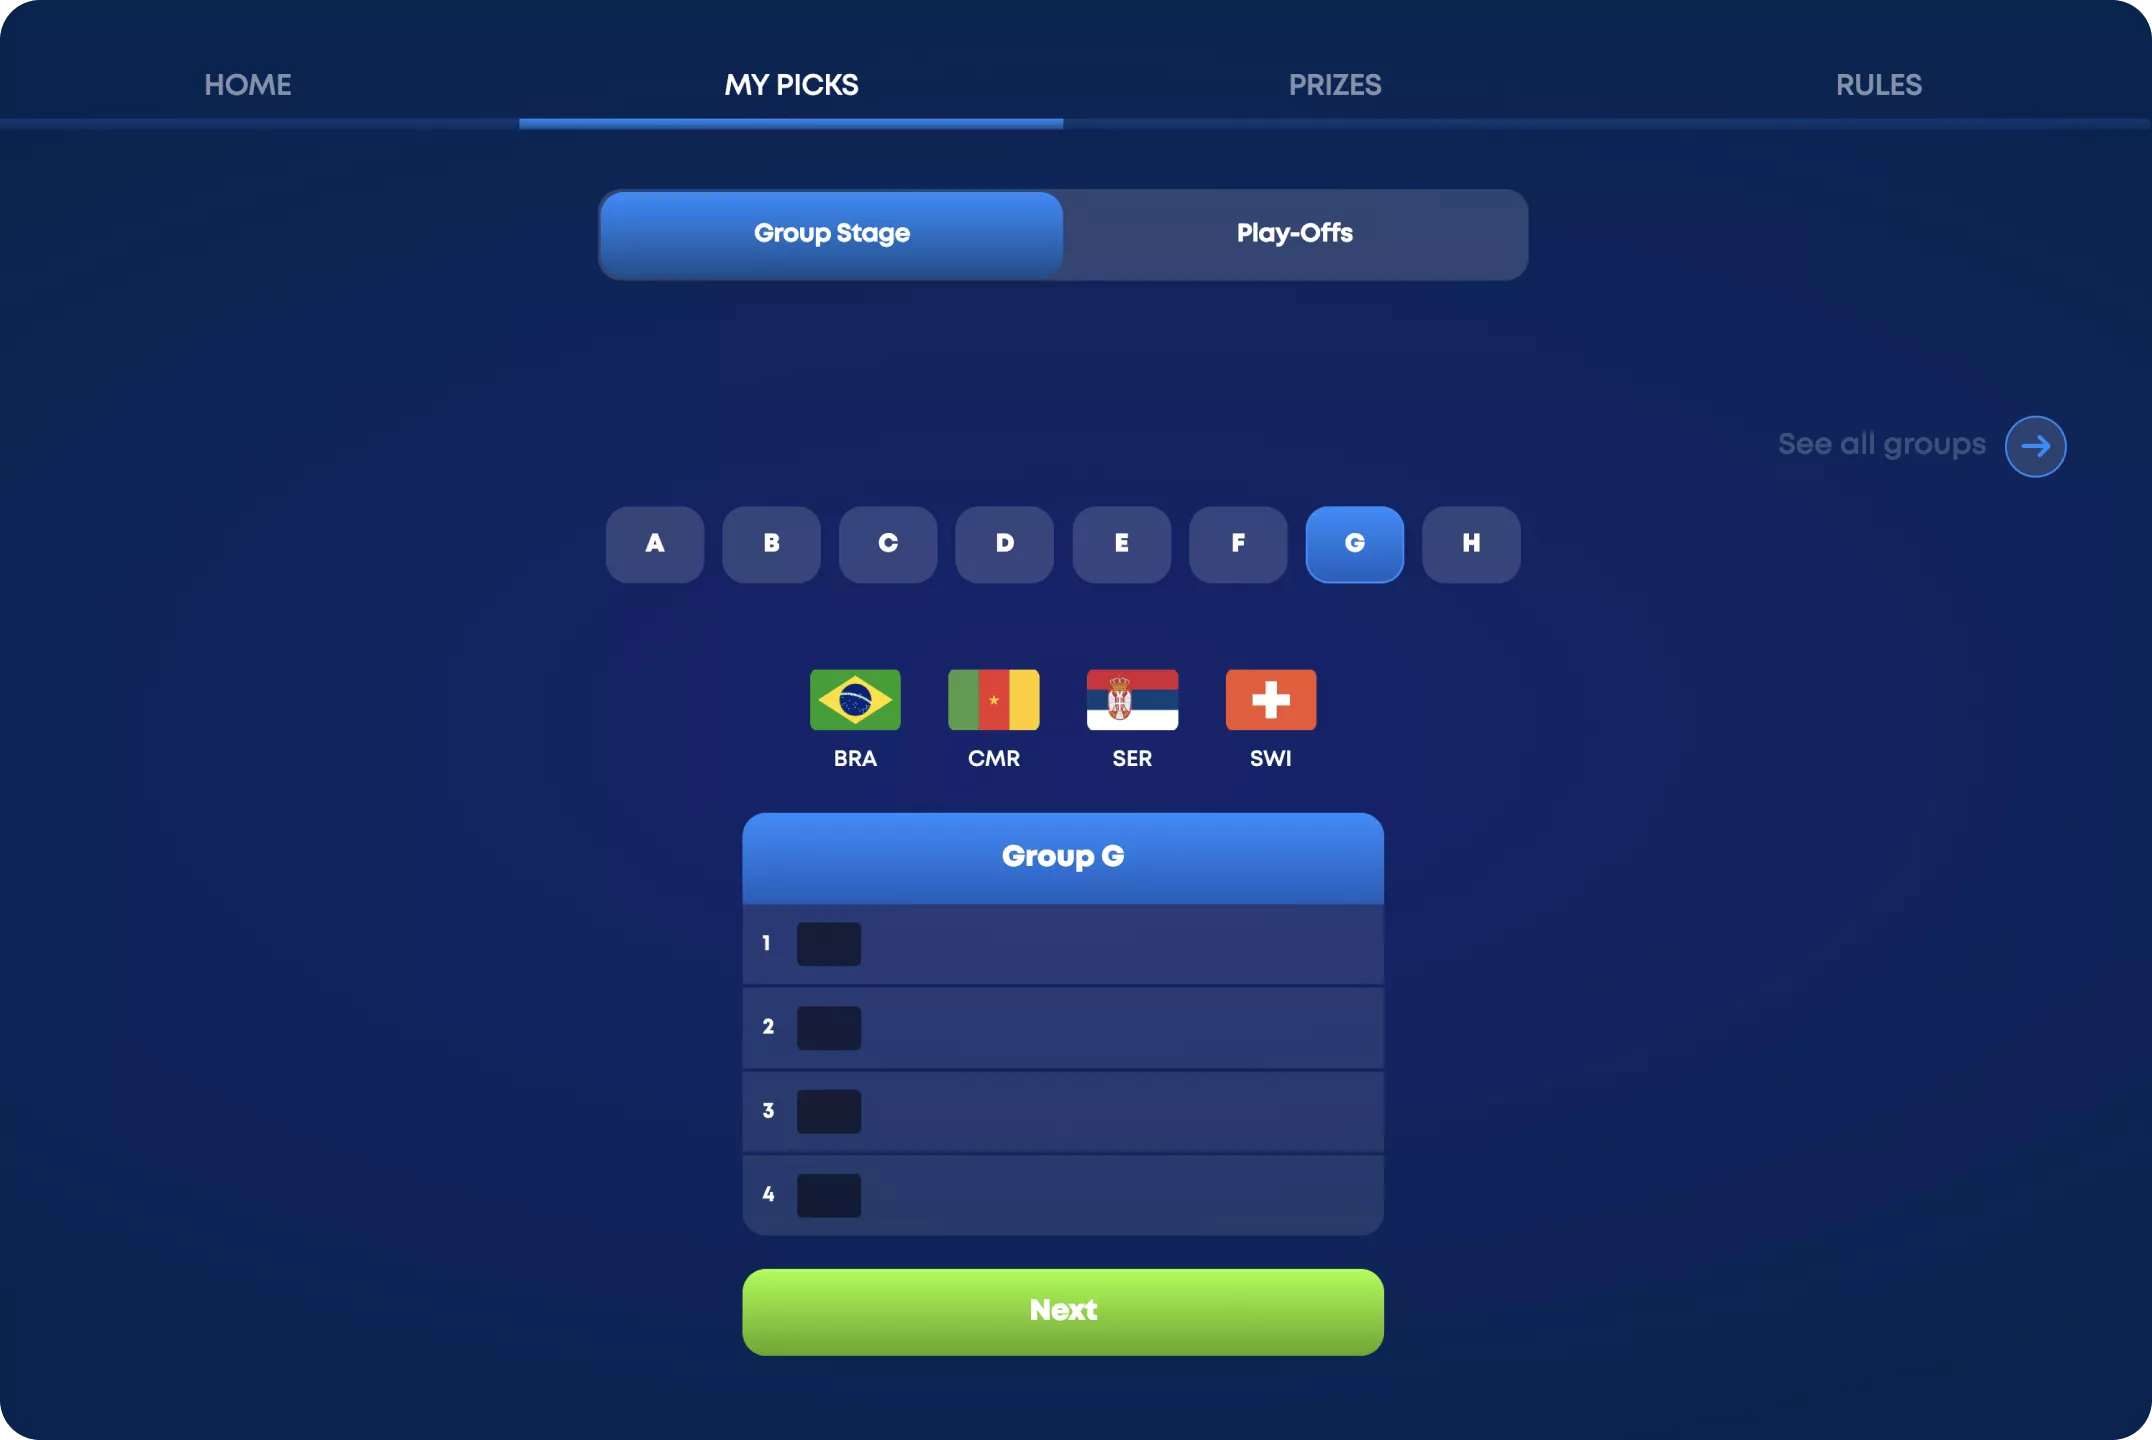 The interface of Lucky Lotto Lottery